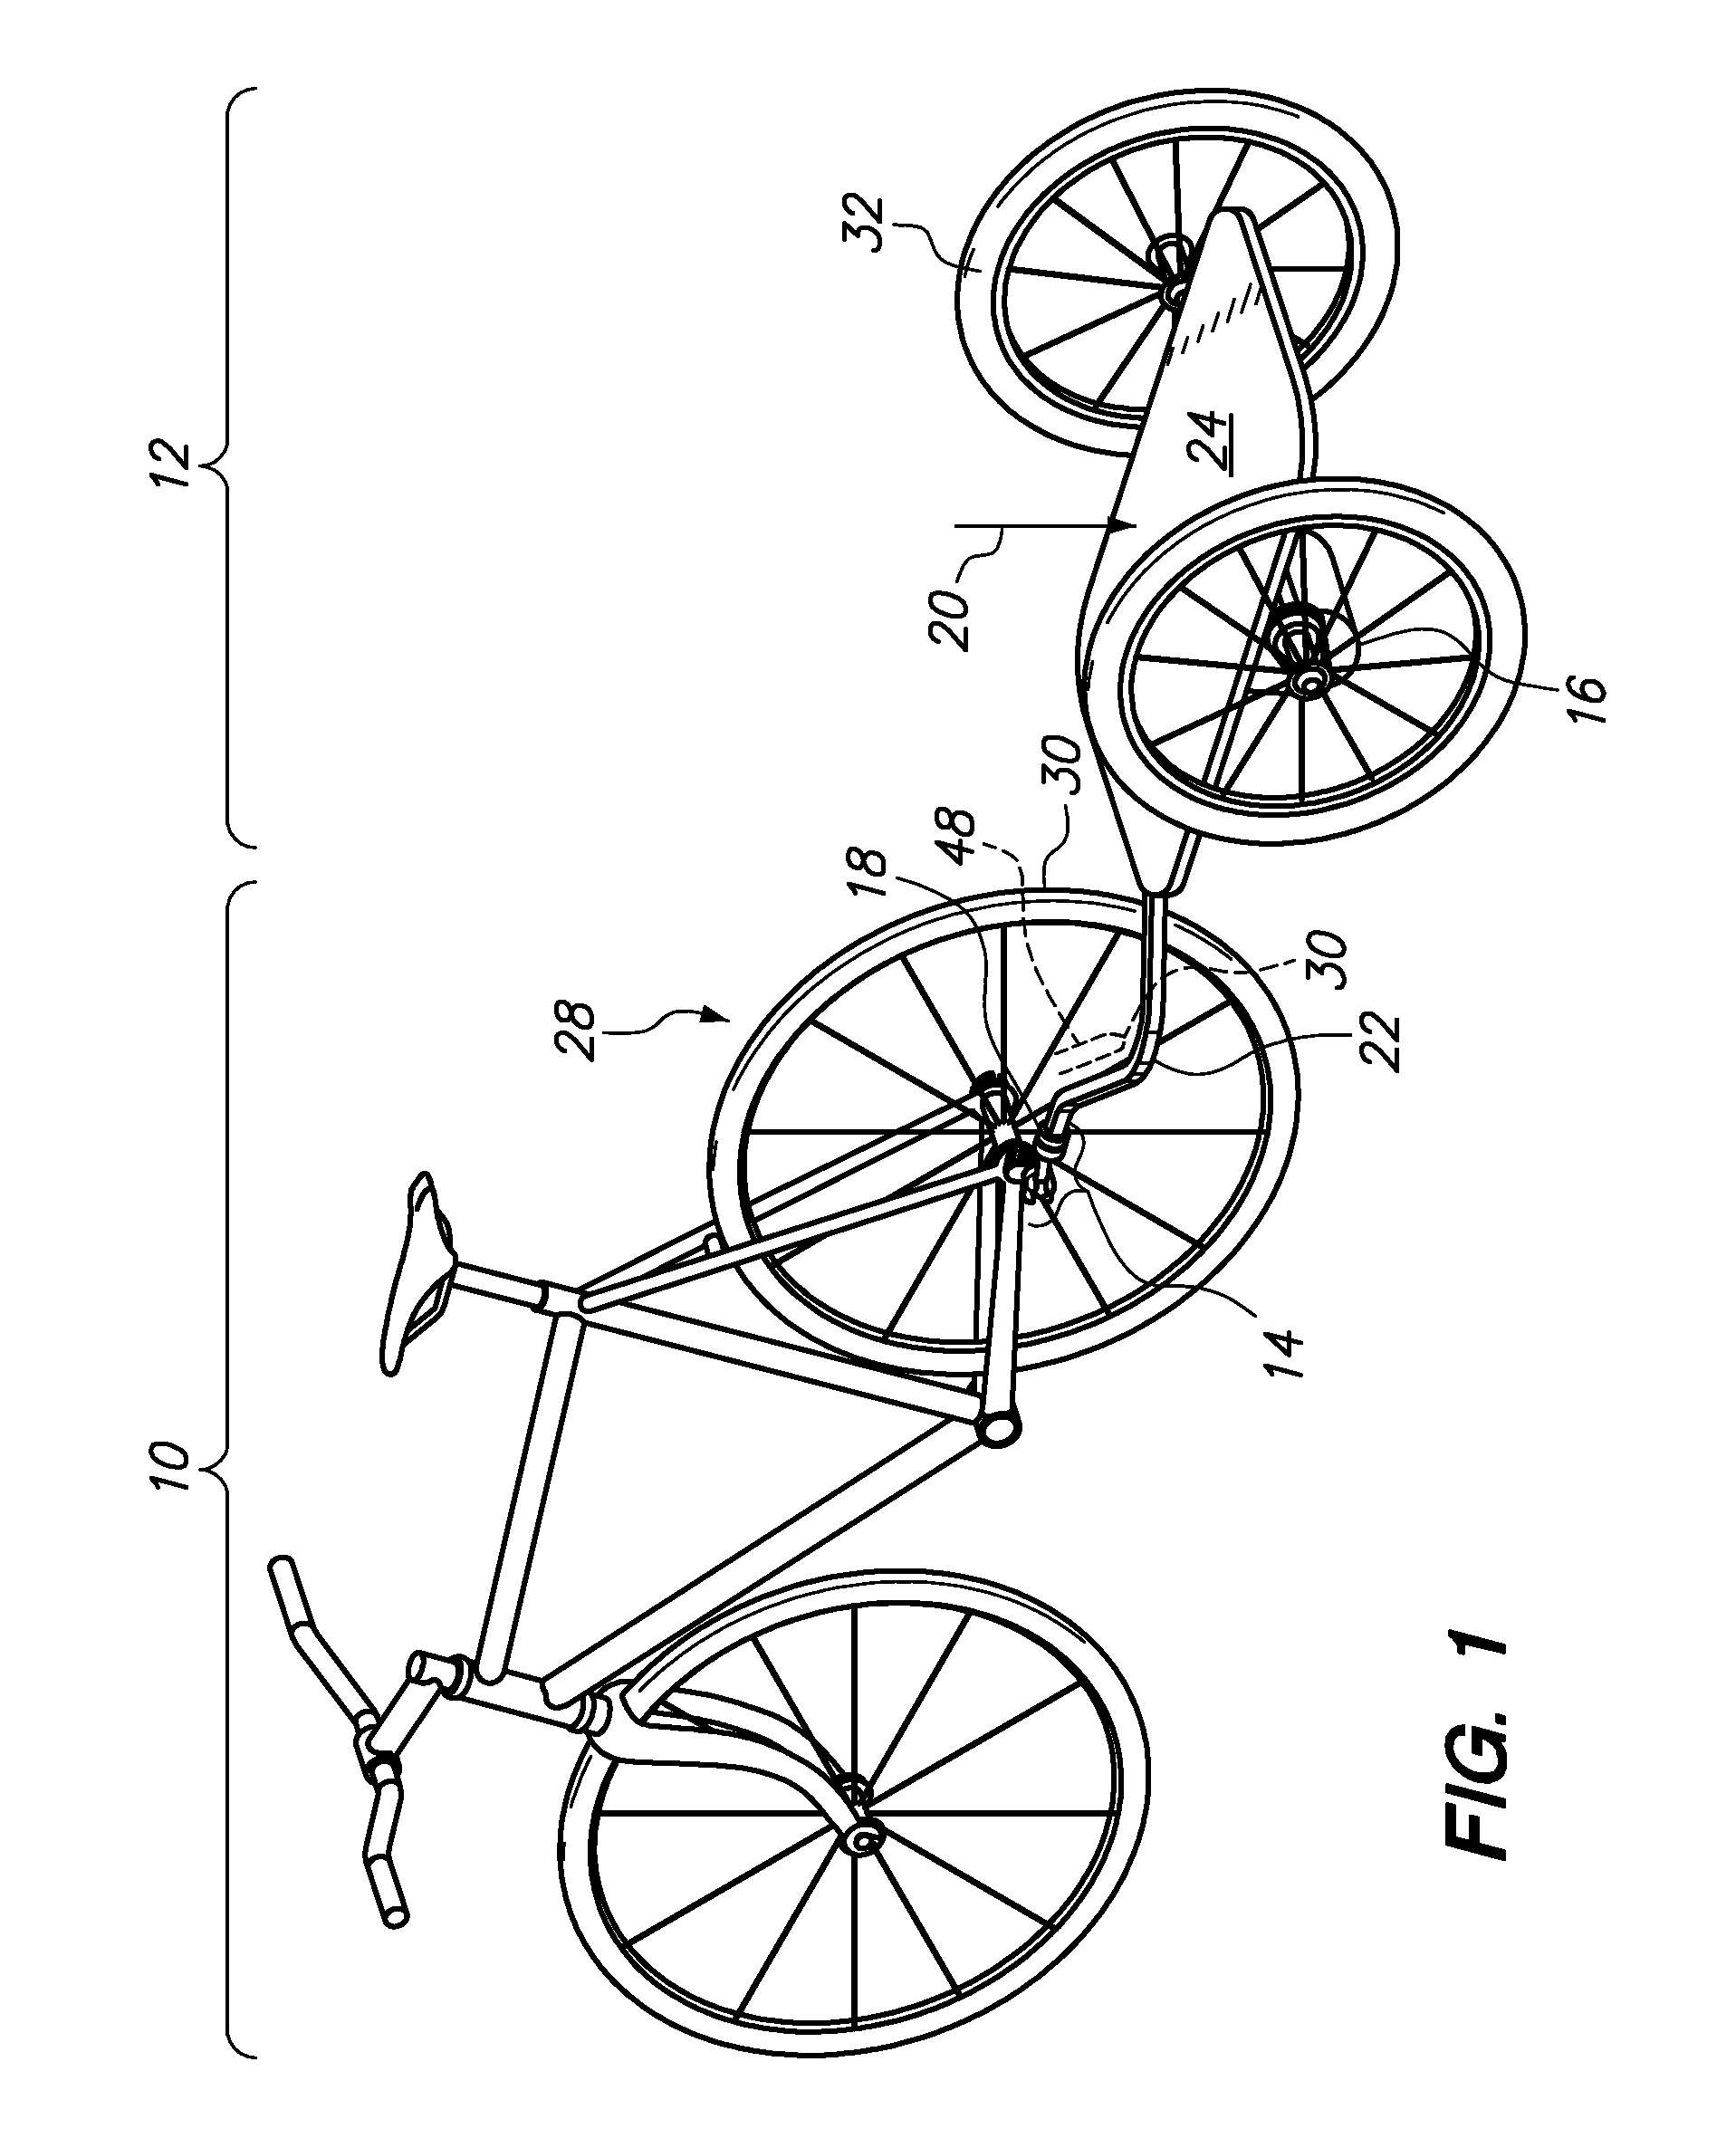 Motor powered bicycle trailer with integral hitch force metering